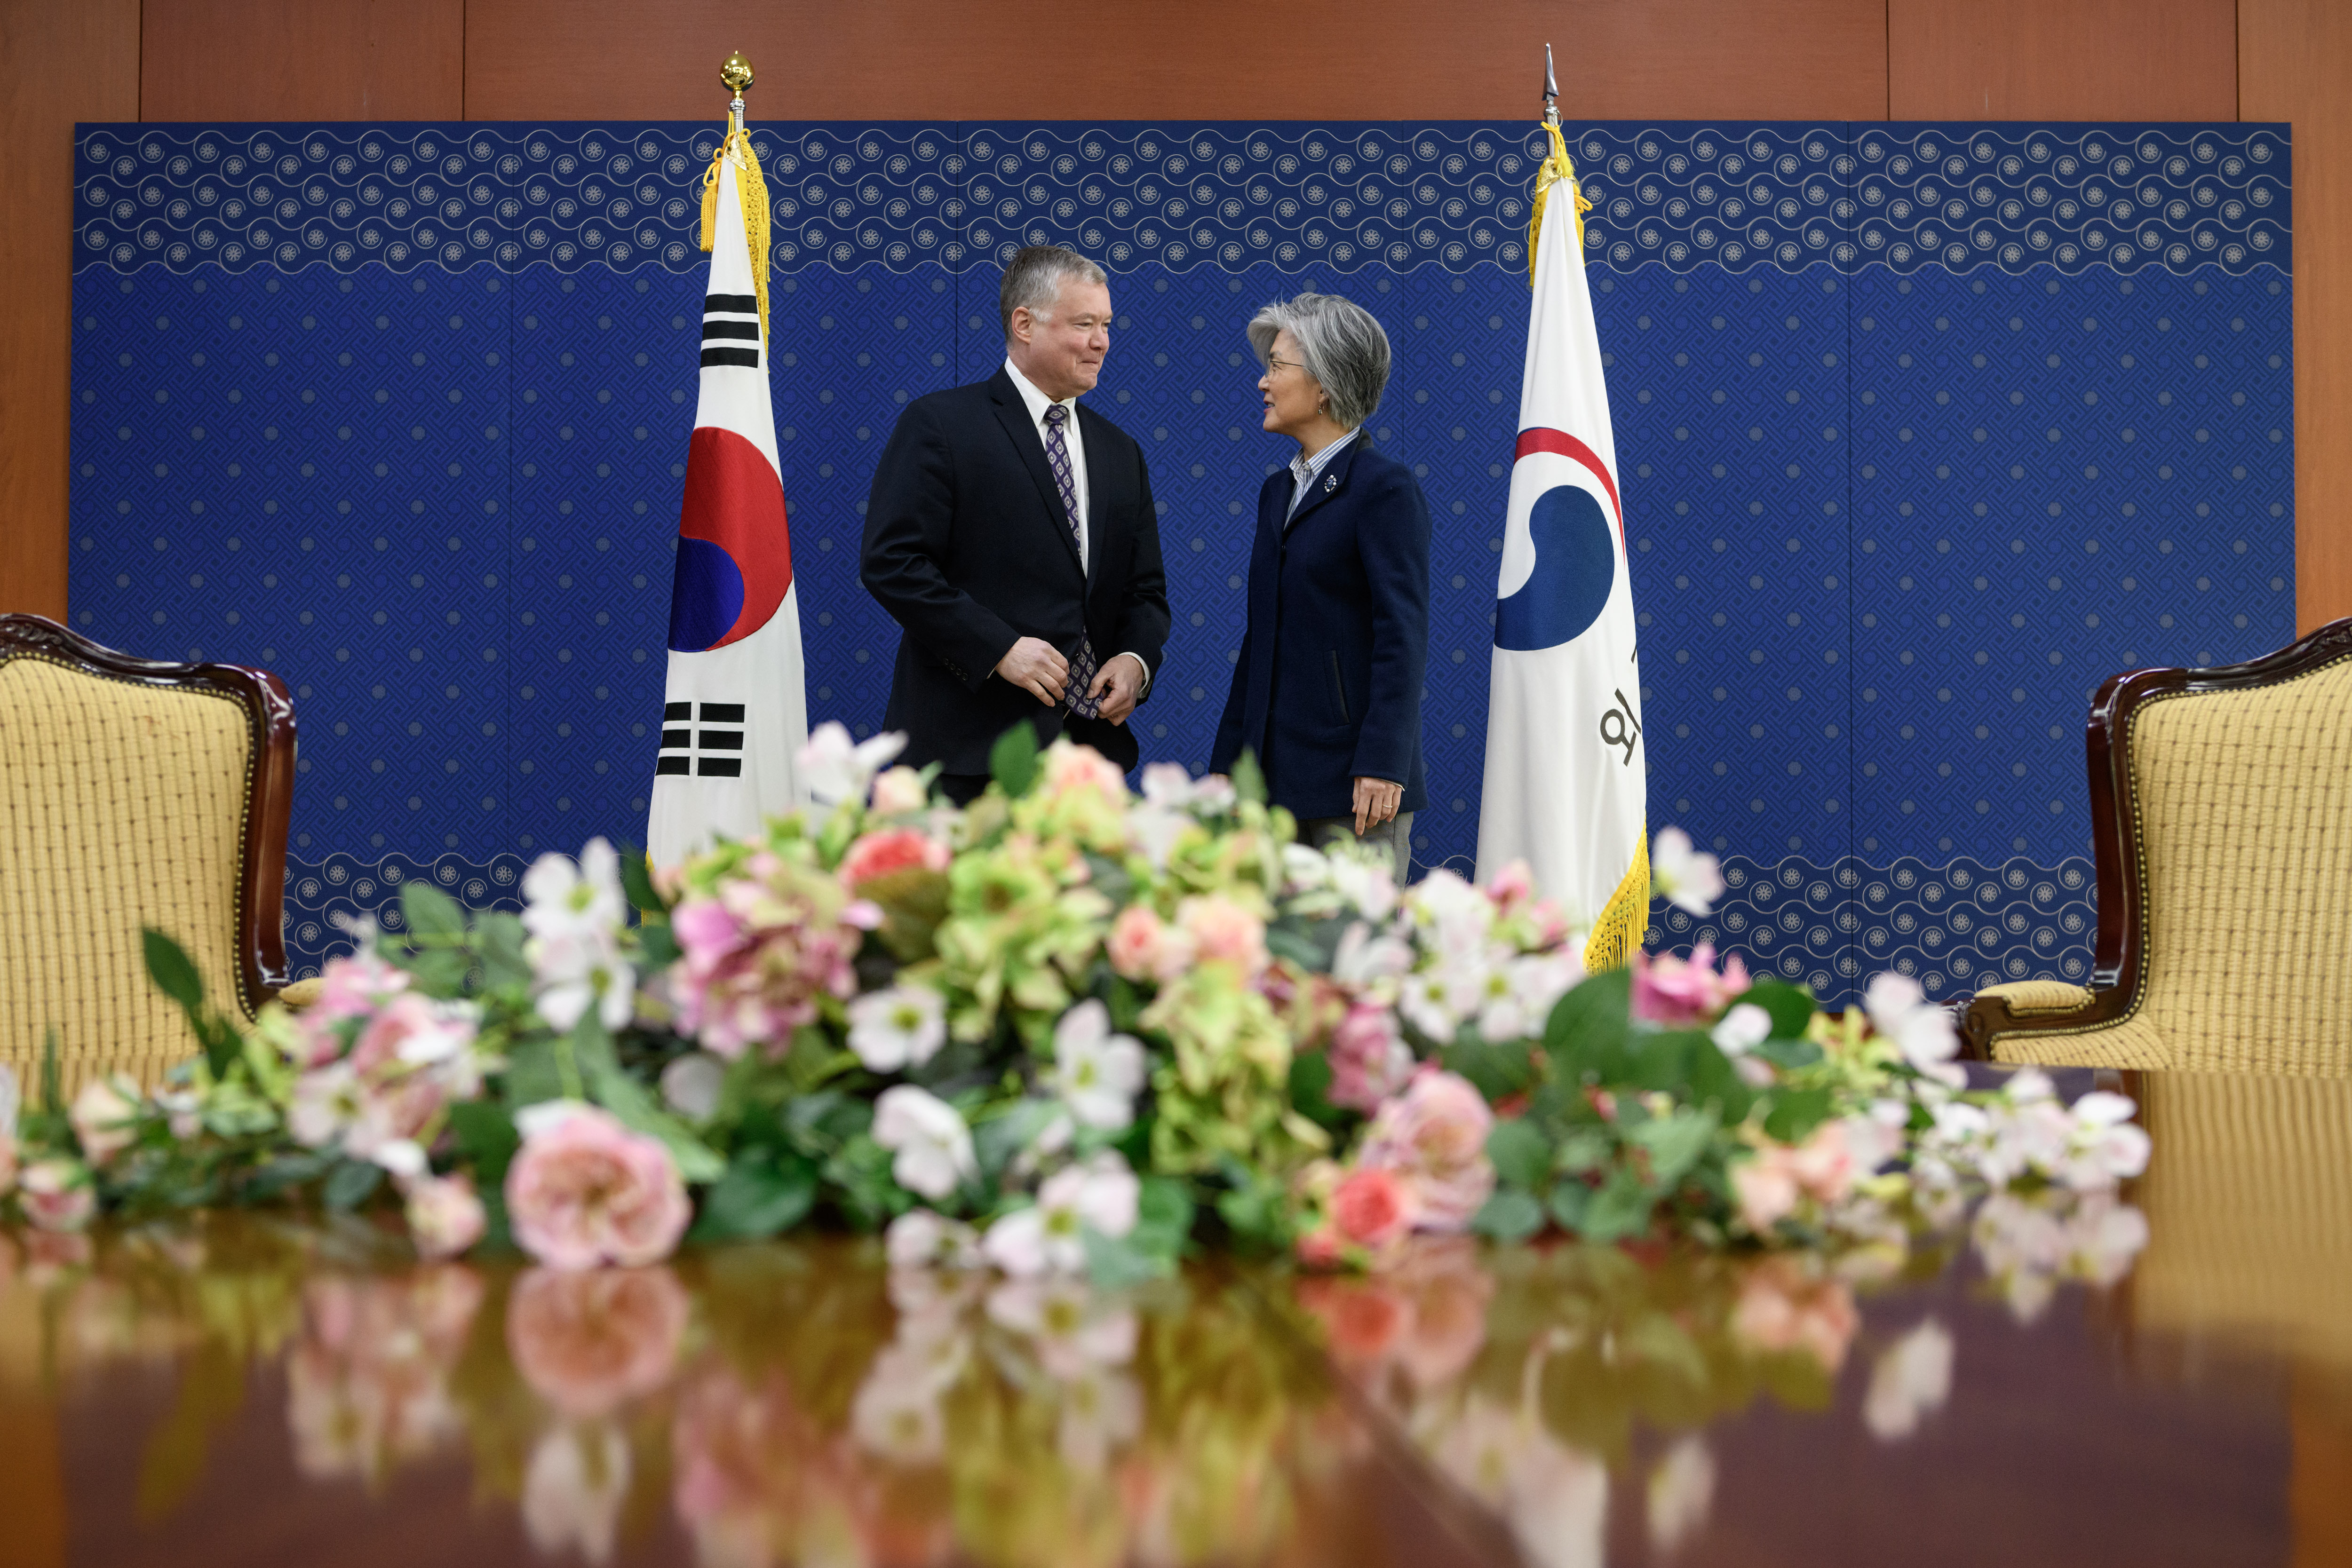 US Special Representative for North Korea Stephen Beigun (L) stands with South Korea's Foreign Minister Kang Kyung-wha (R) during their meeting at the foreign ministry in Seoul on February 9, 2019. (Photo by Ed Jones-Pool via Getty Images)